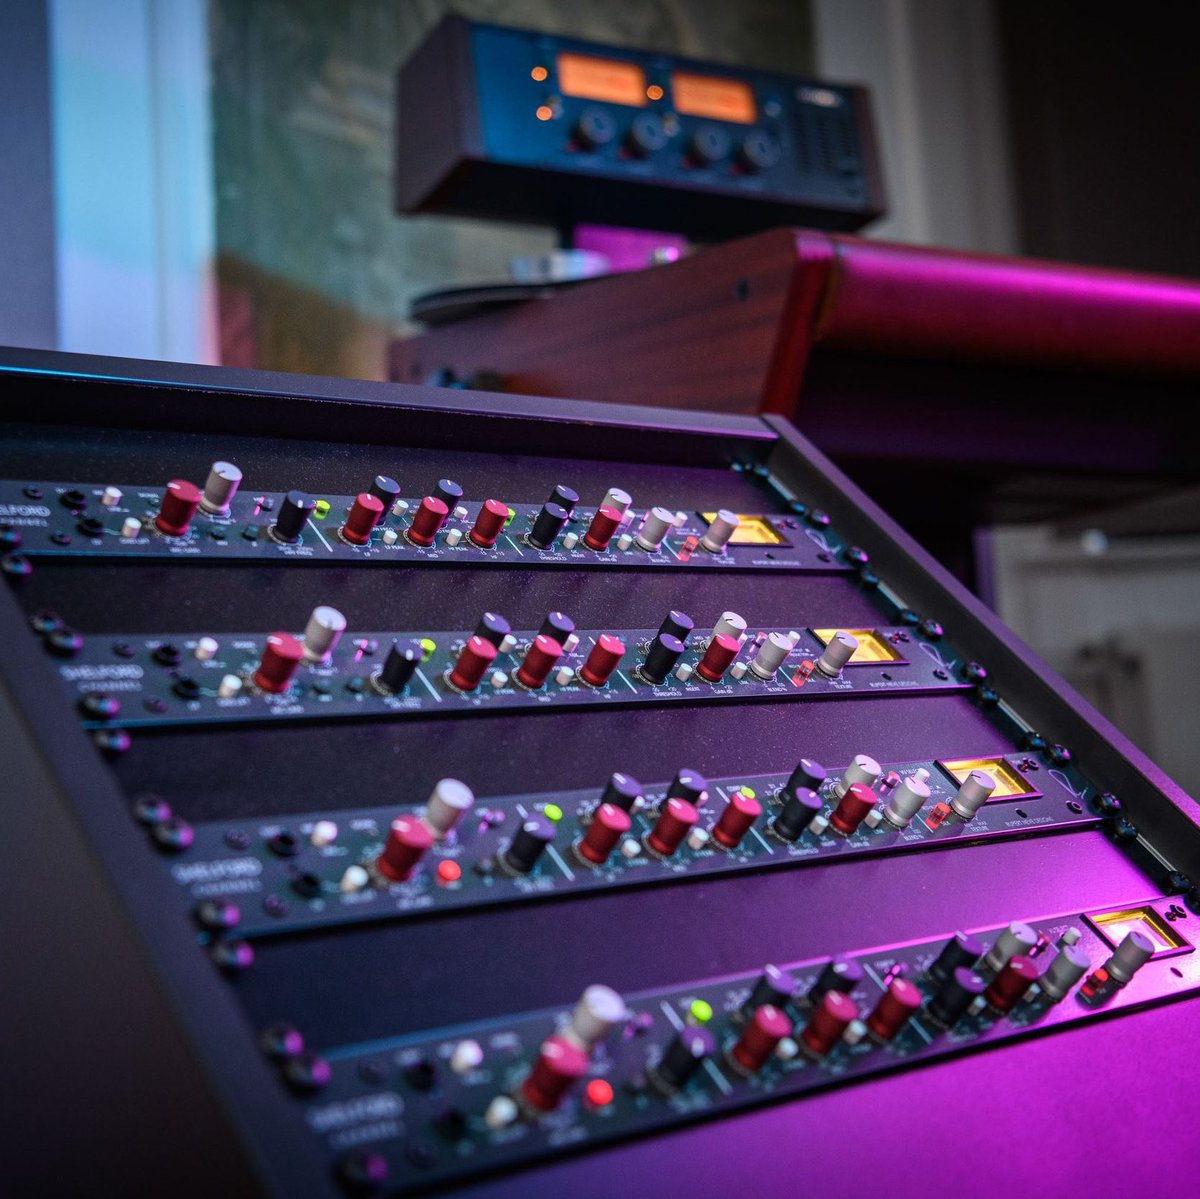 Head over to Rupert Neve designs to learn about why we chose the shelford channels to help create our new release Desolate Guitars. rupertneve.com/news/e-instrum…